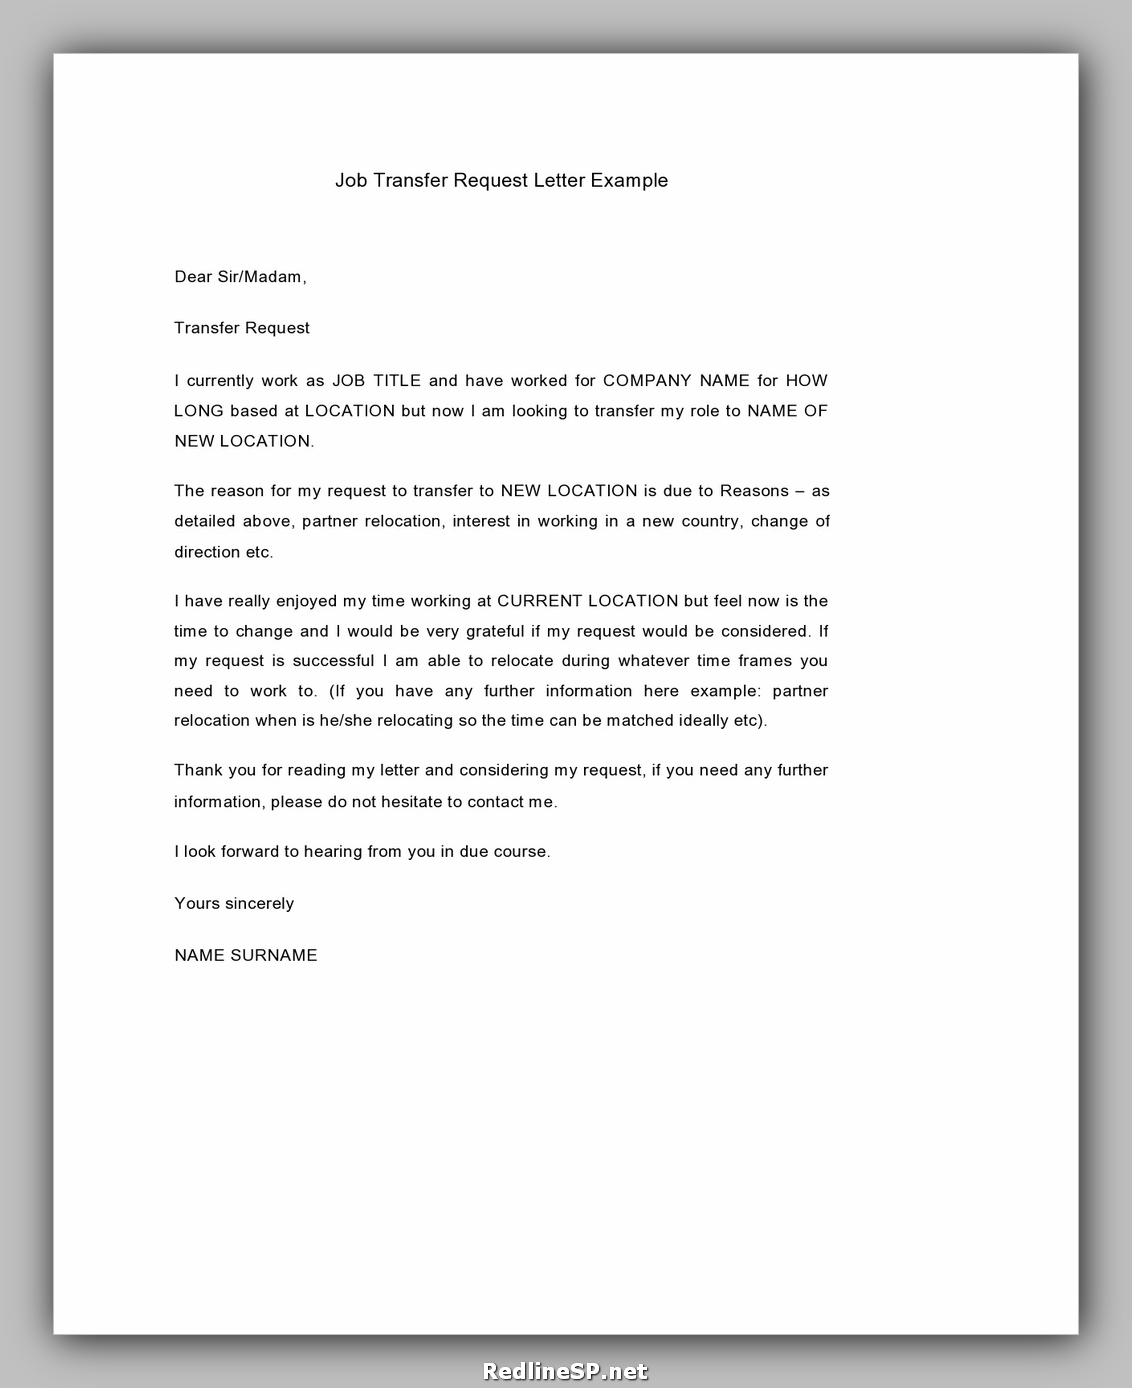 Job Transfer Letter From Employer Example Bank2home com